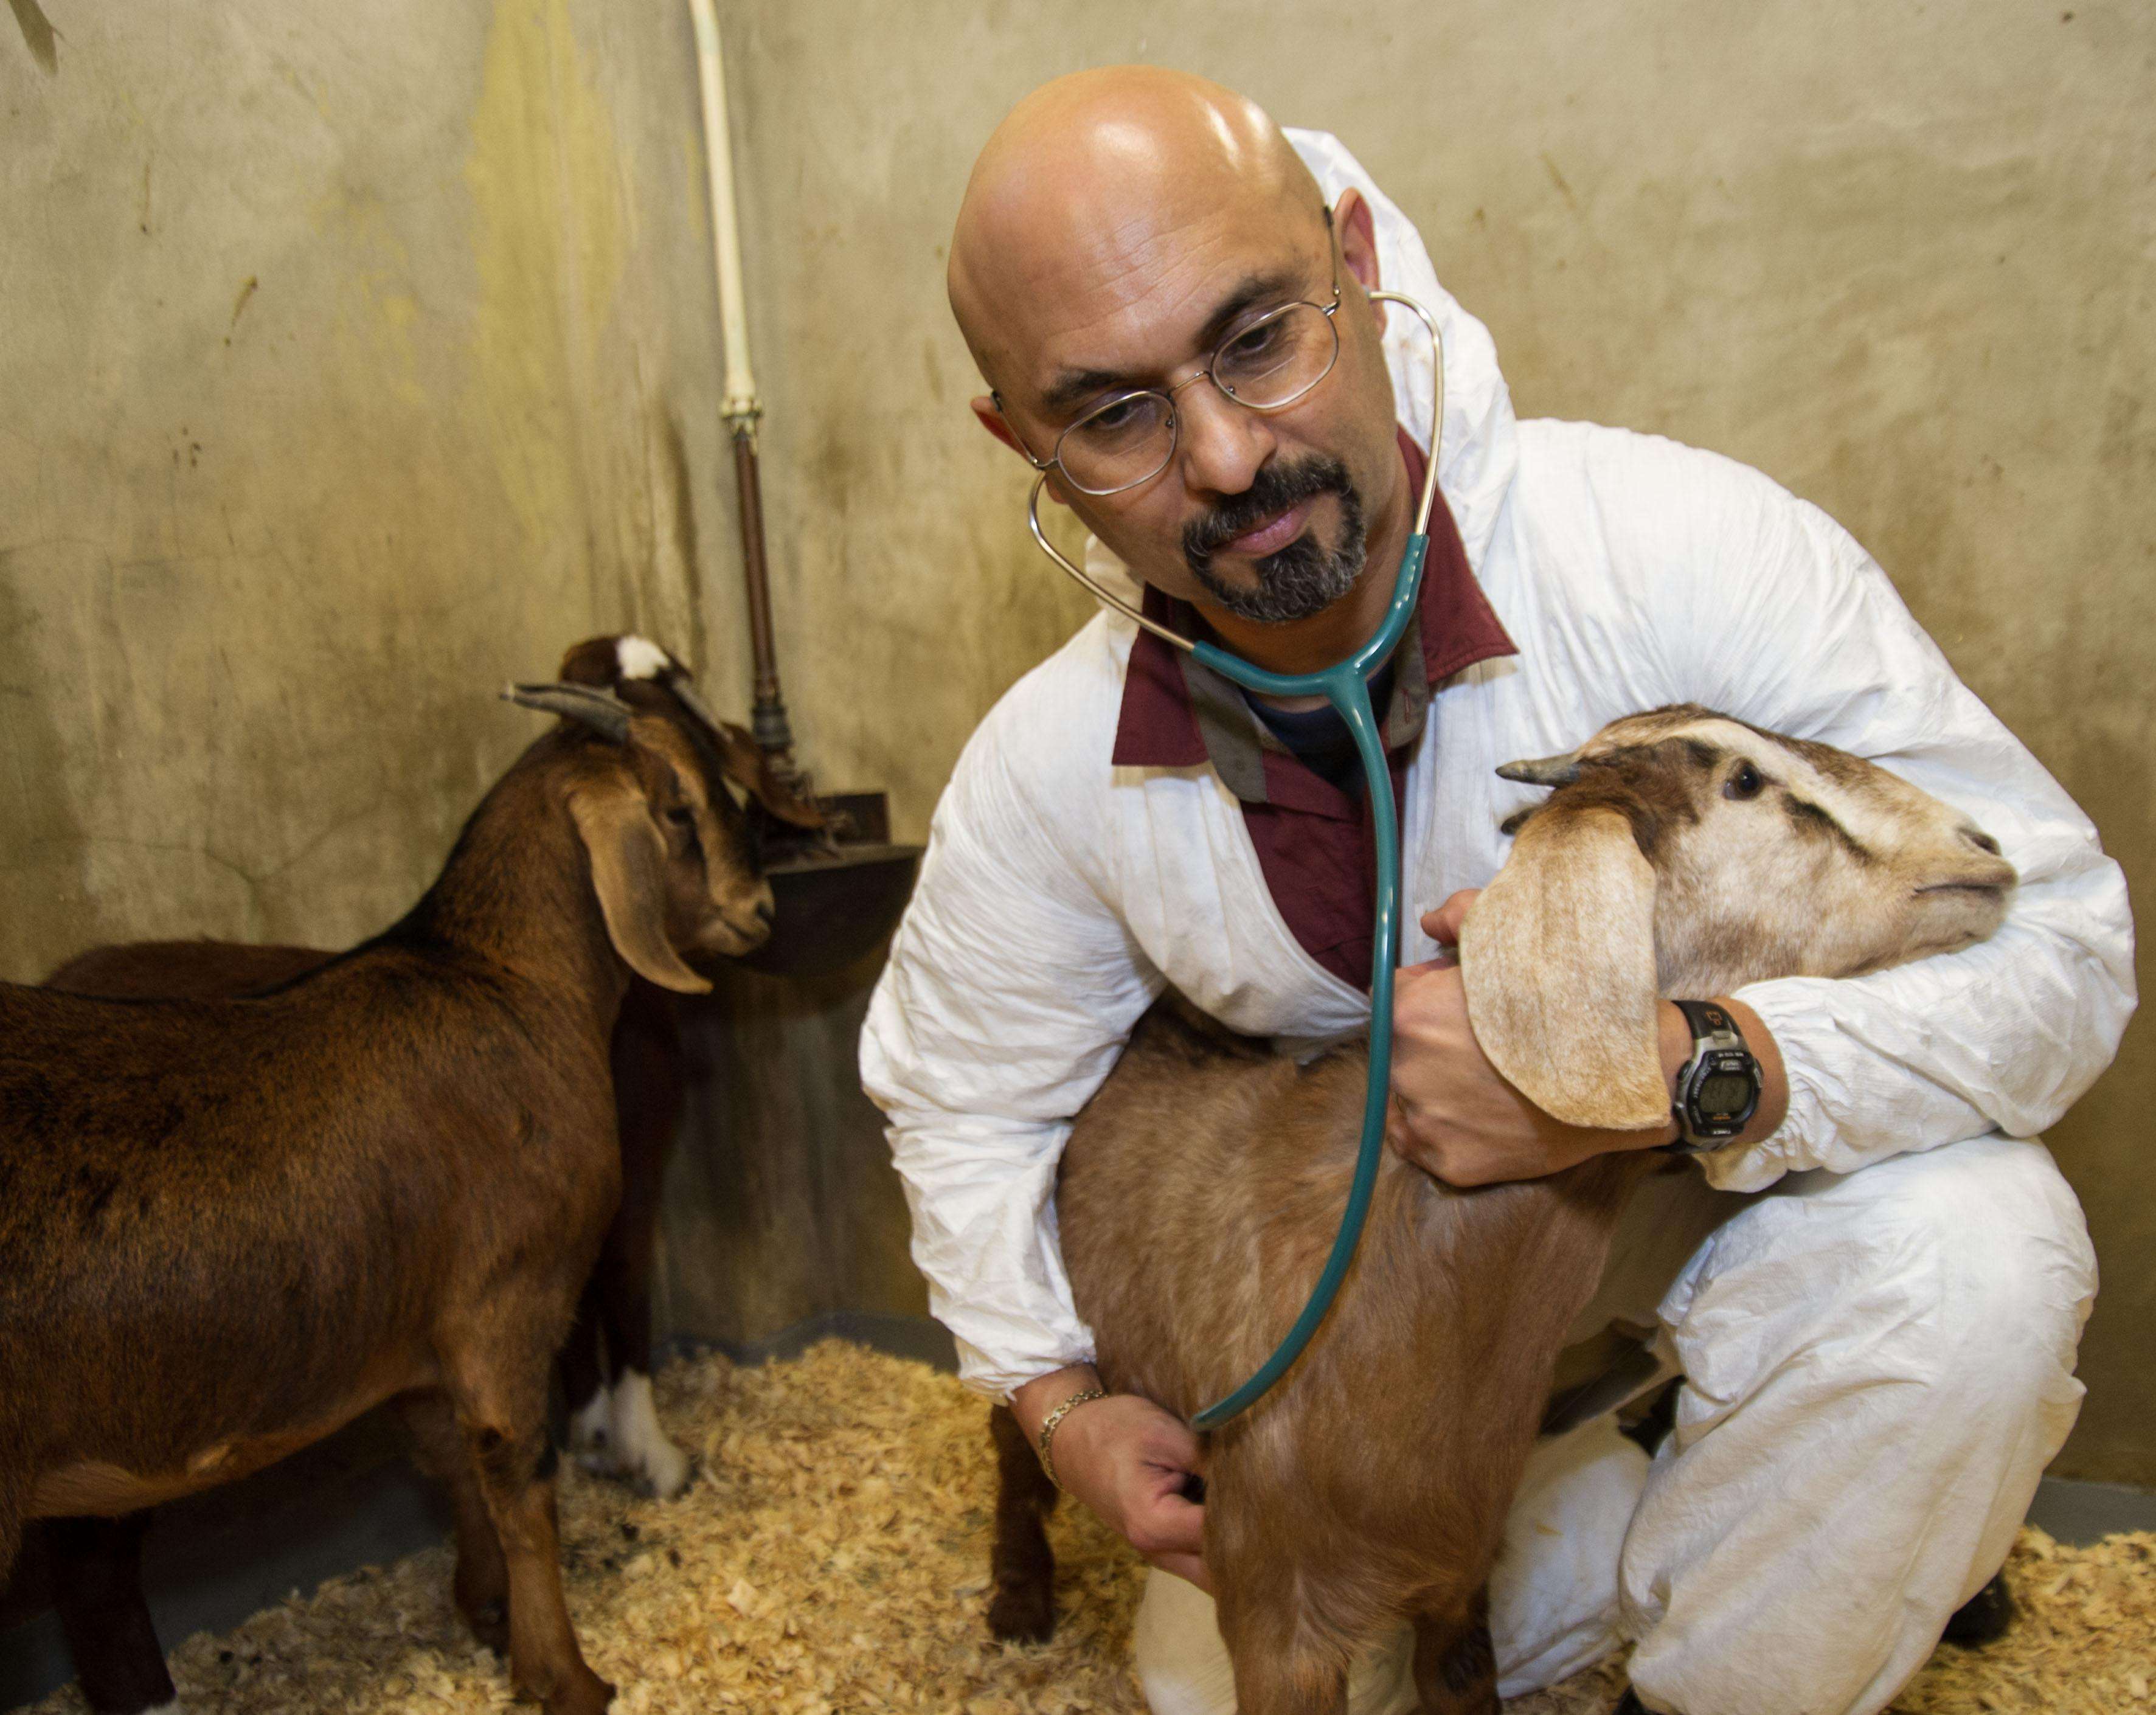 Male veterinarian using a stethoscope with goats in a pen.